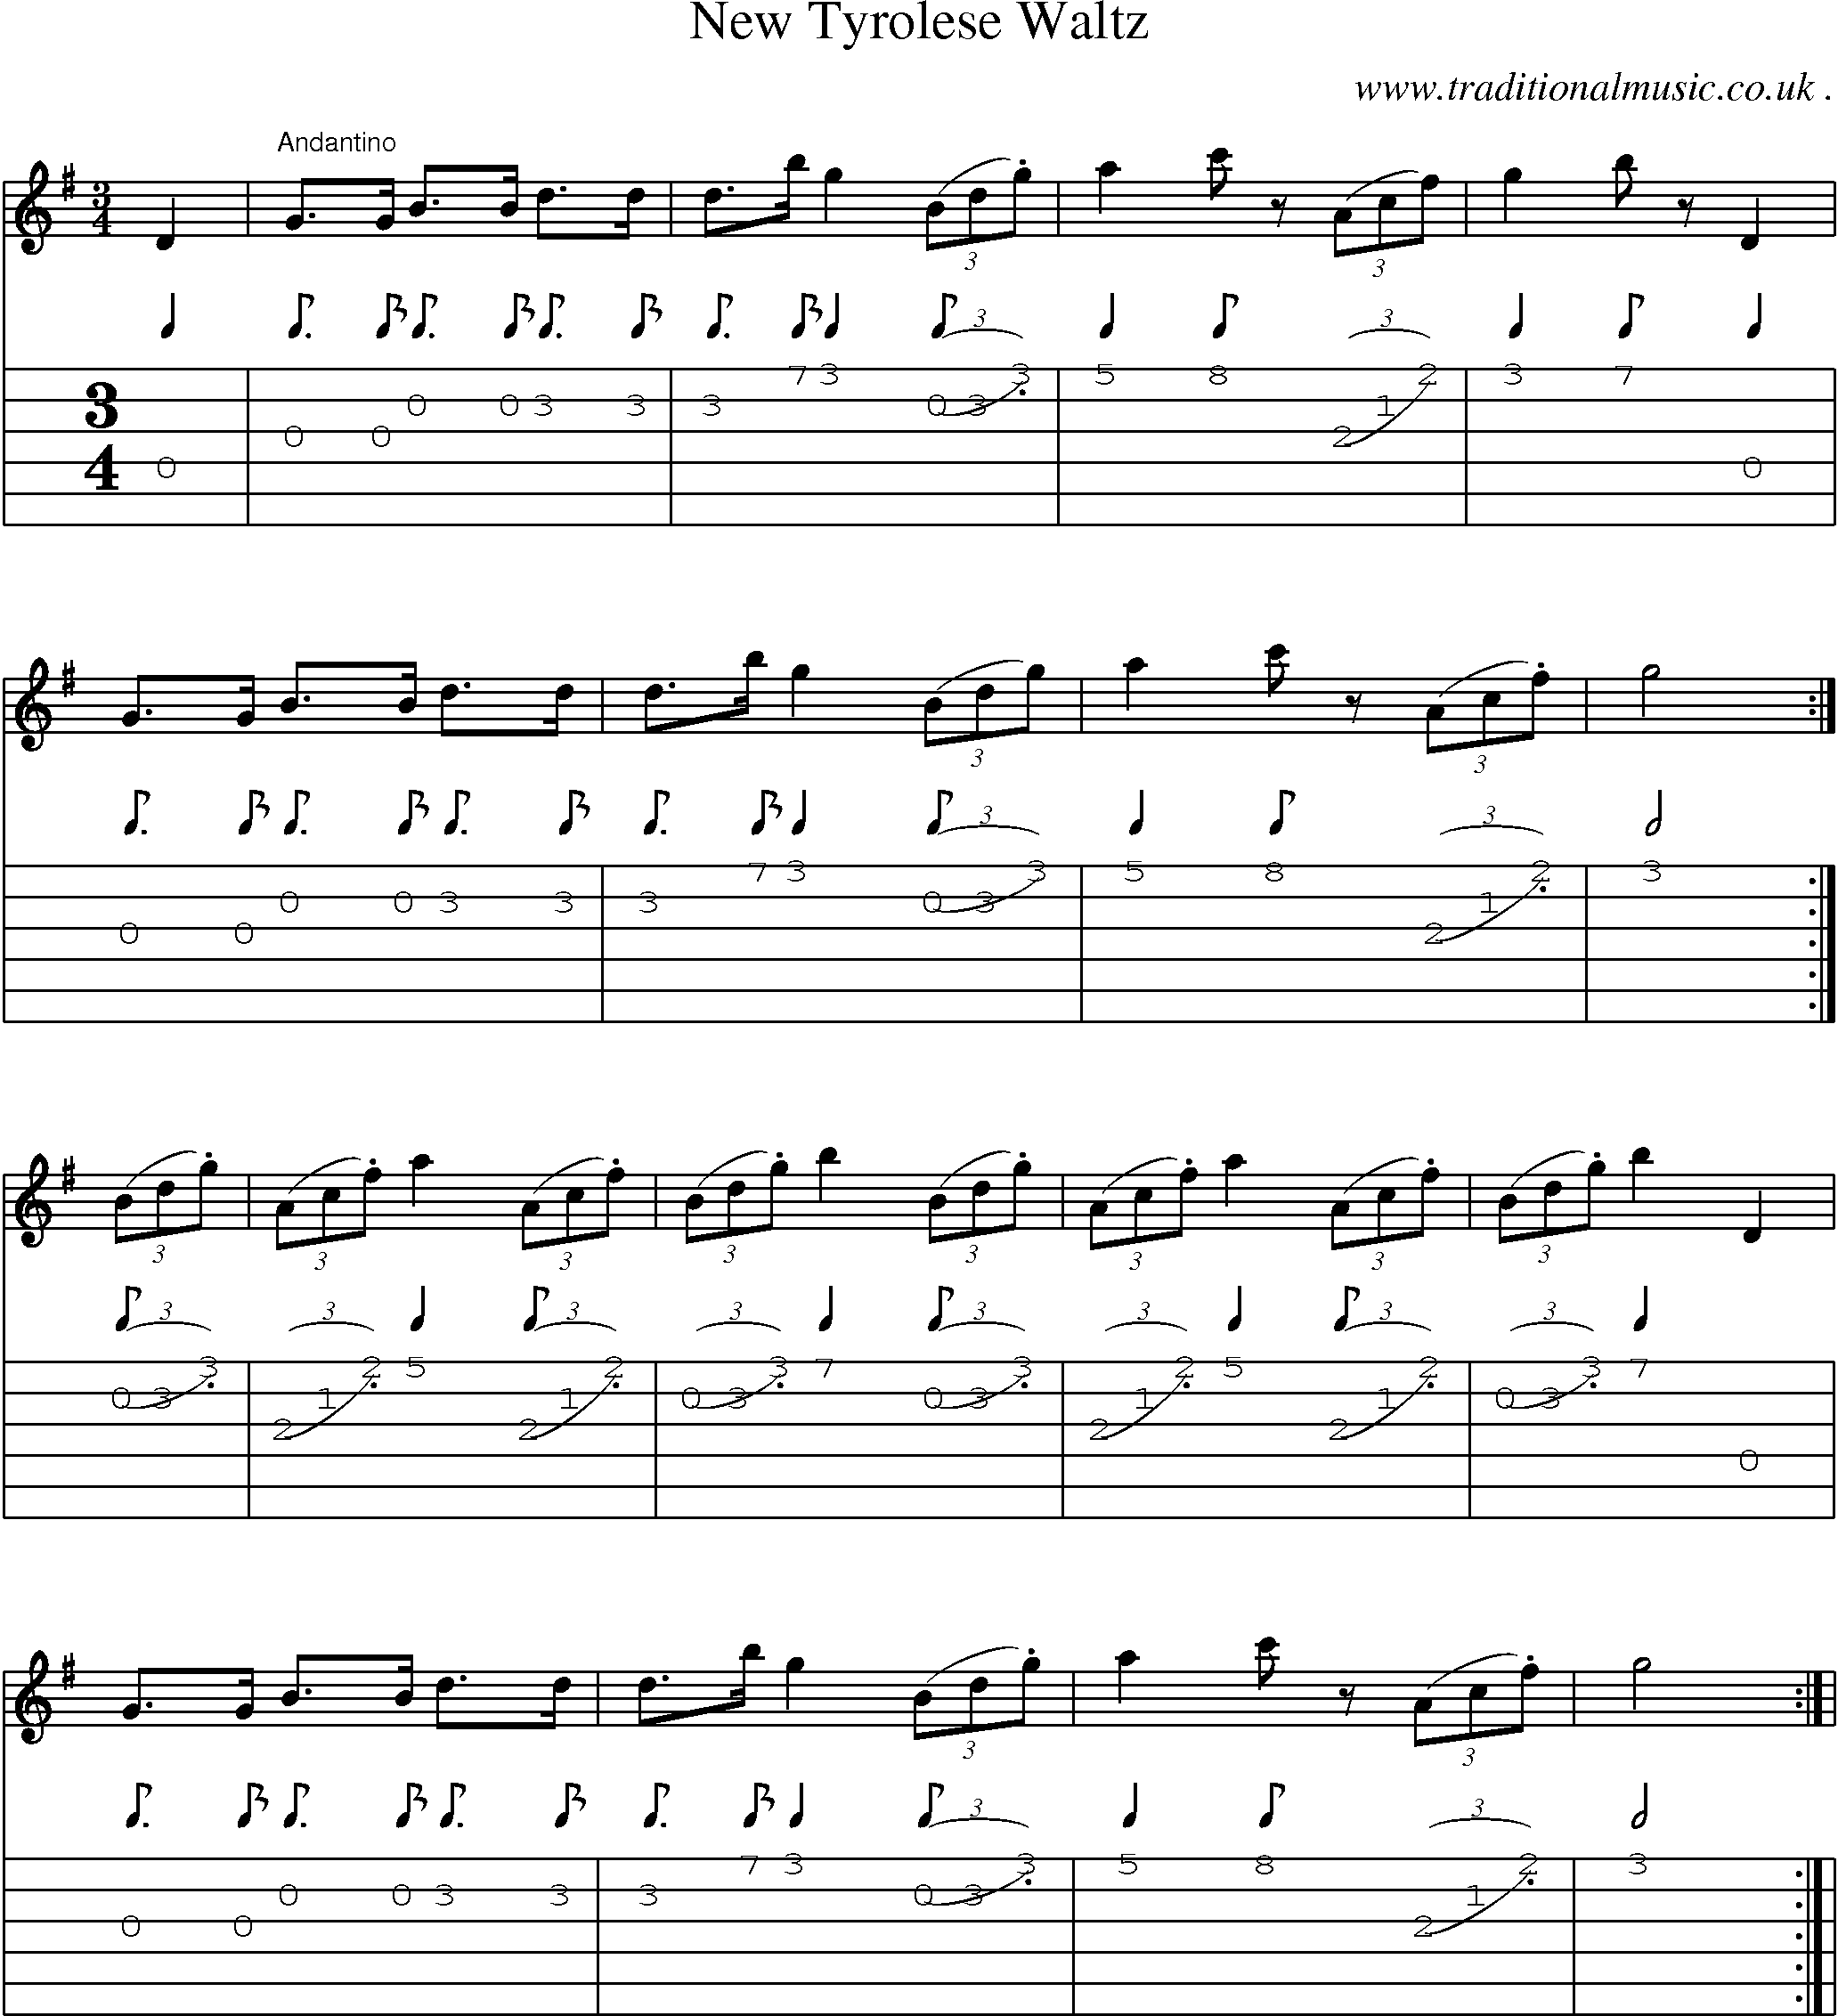 Sheet-Music and Guitar Tabs for New Tyrolese Waltz